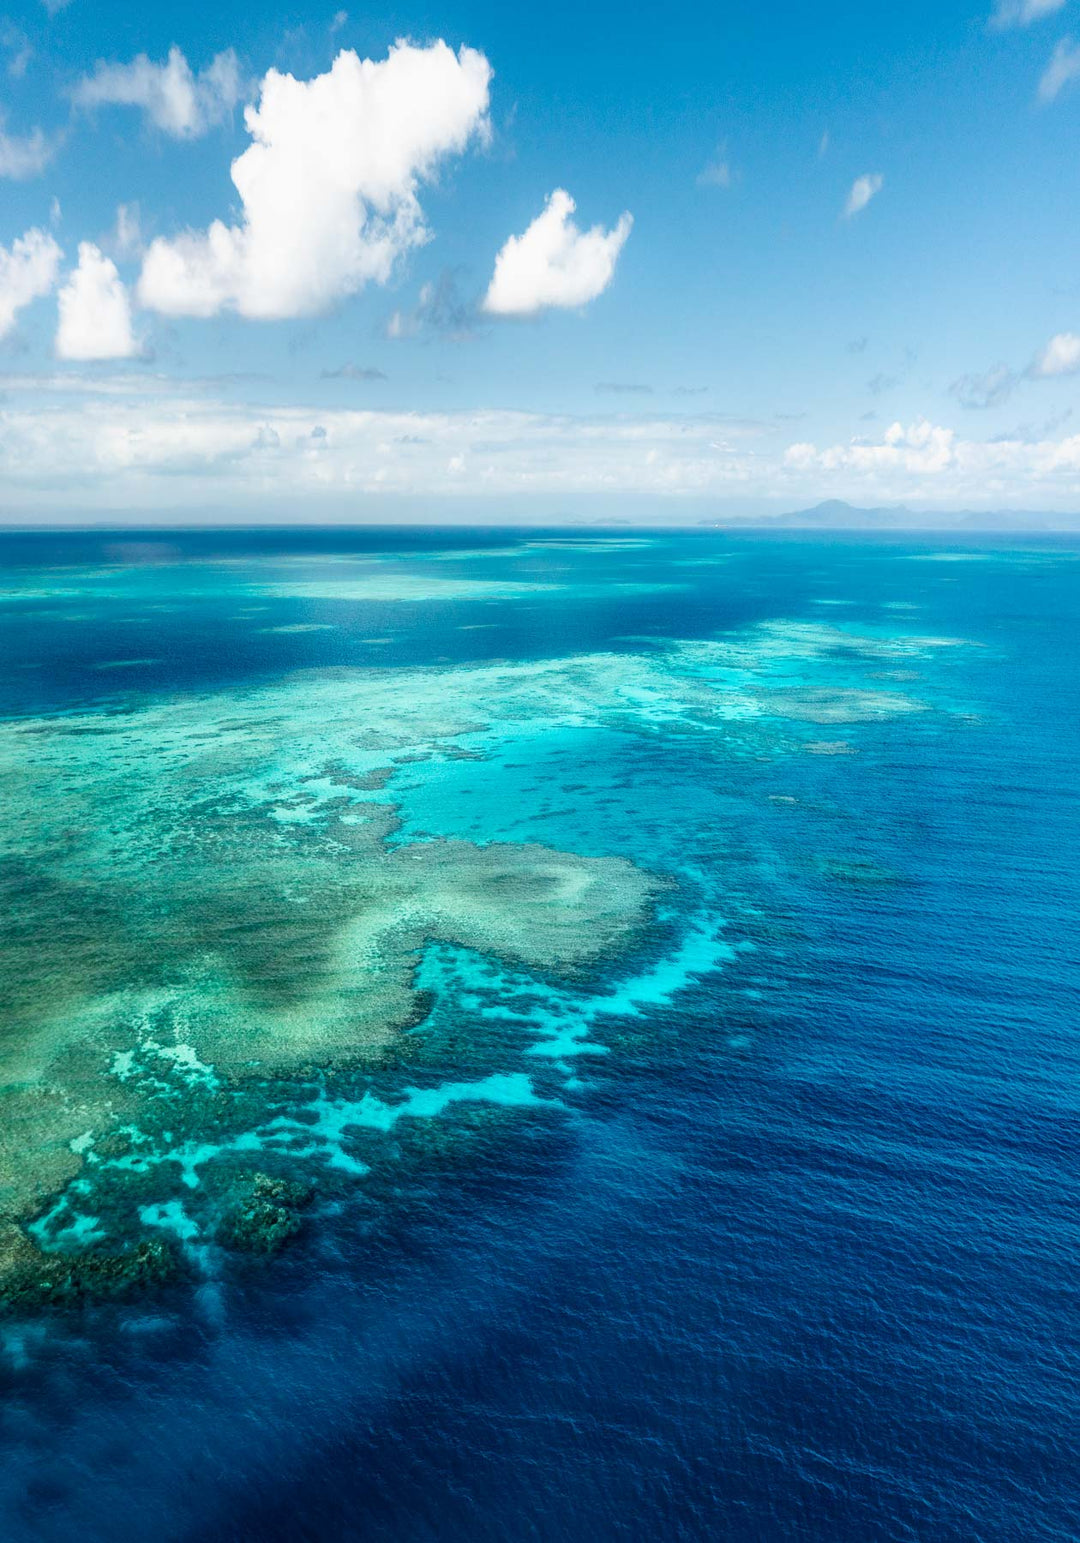 rudder reef portrait photograph over the great barrier reef from a drone